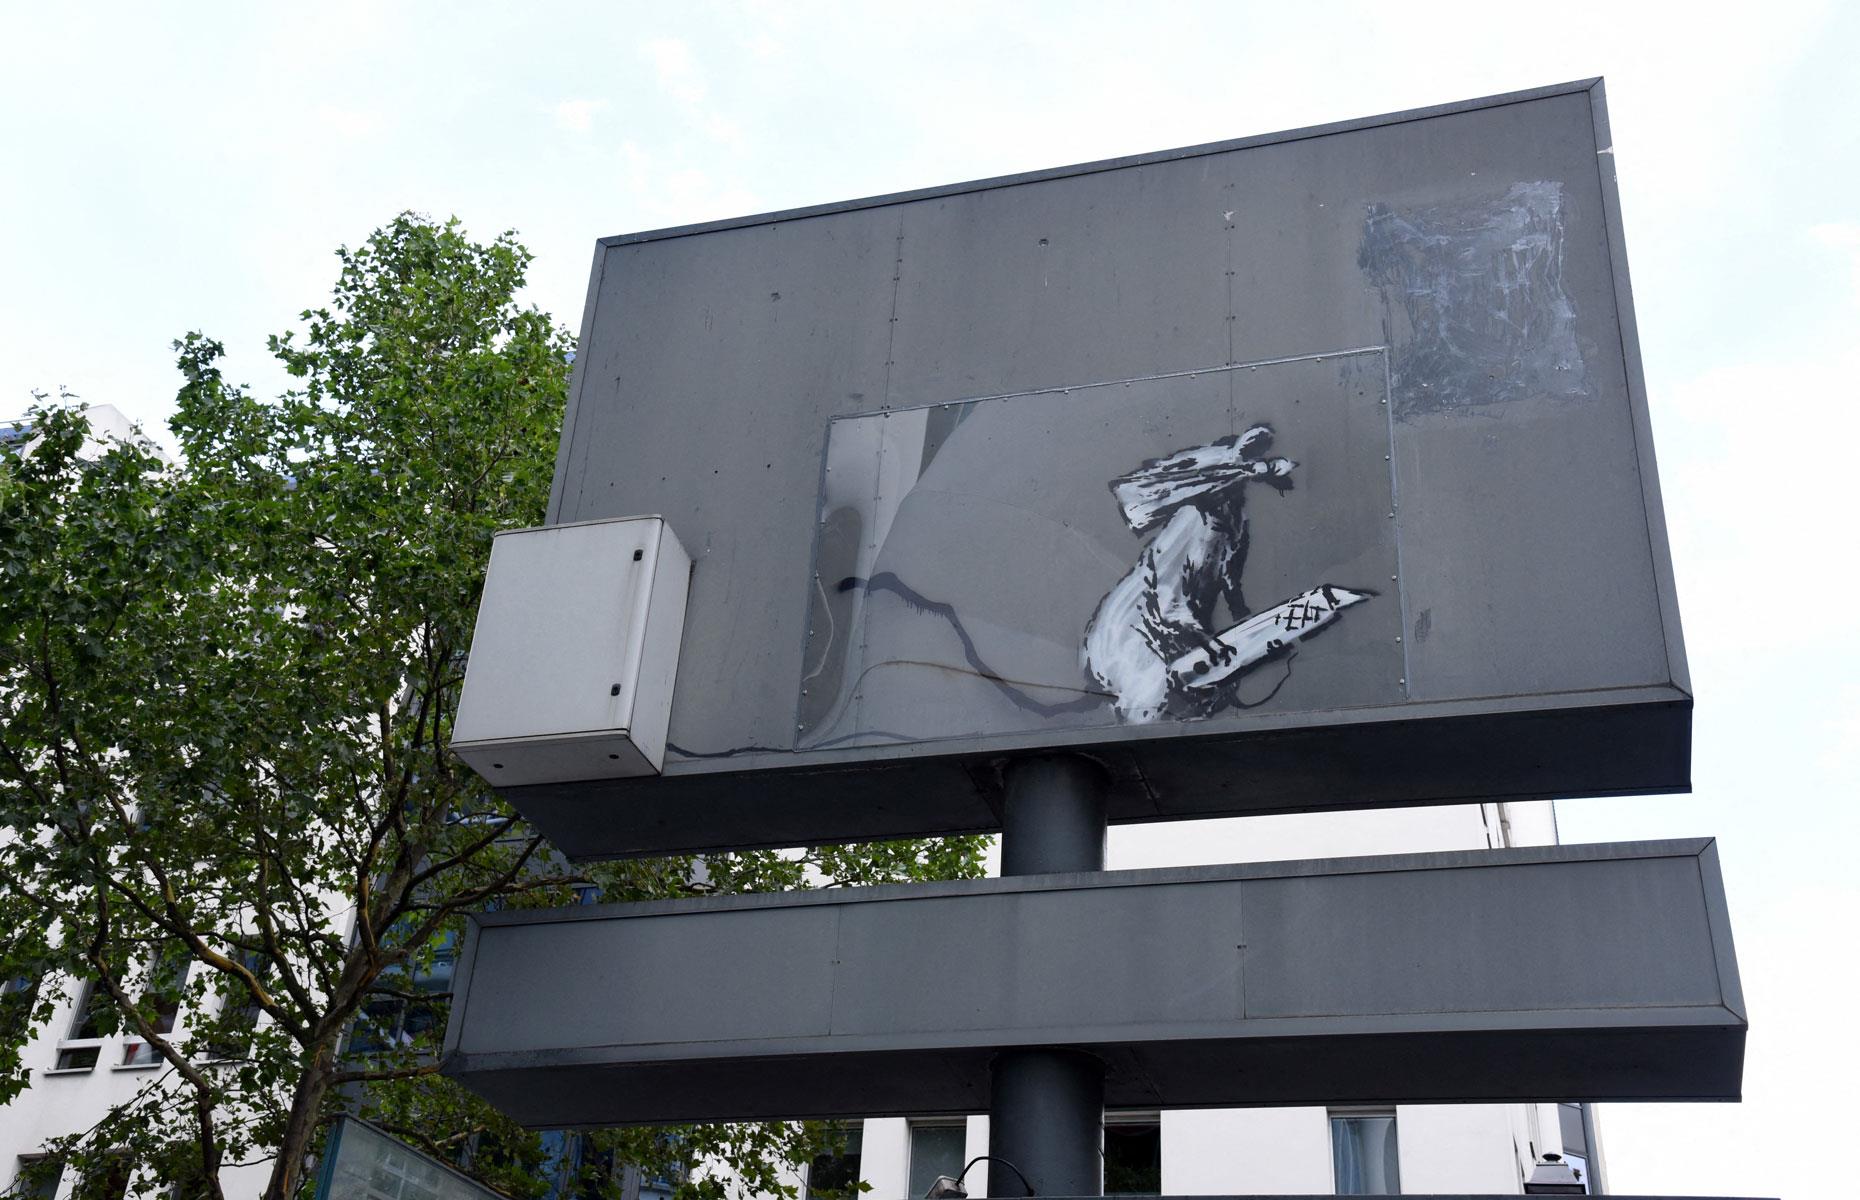 The Banksy rat mural worth up to $766,000 (£595k)